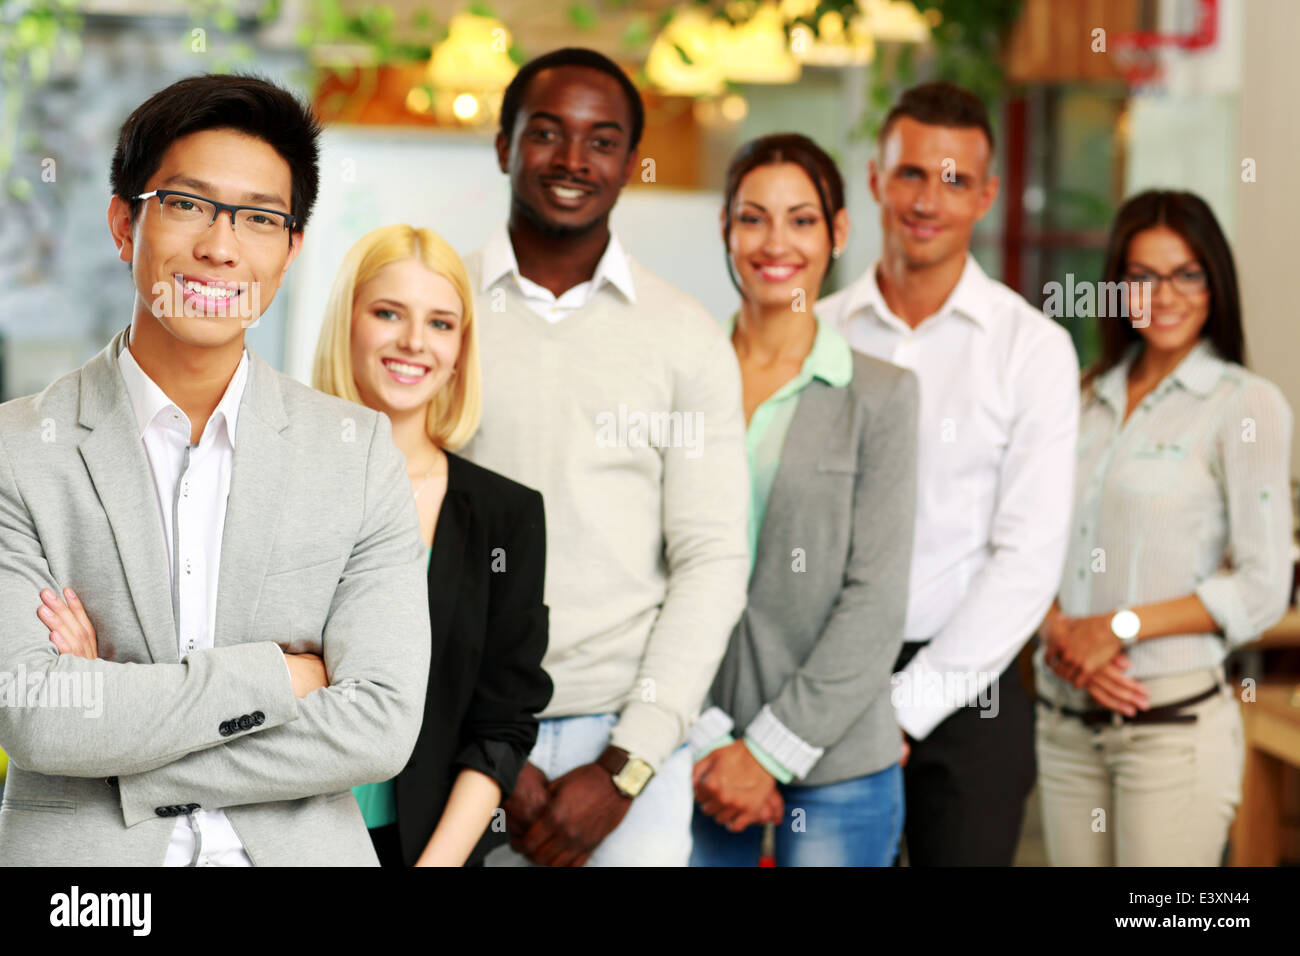 Portrait of a smiling asian businessman standing in front of colleagues Stock Photo